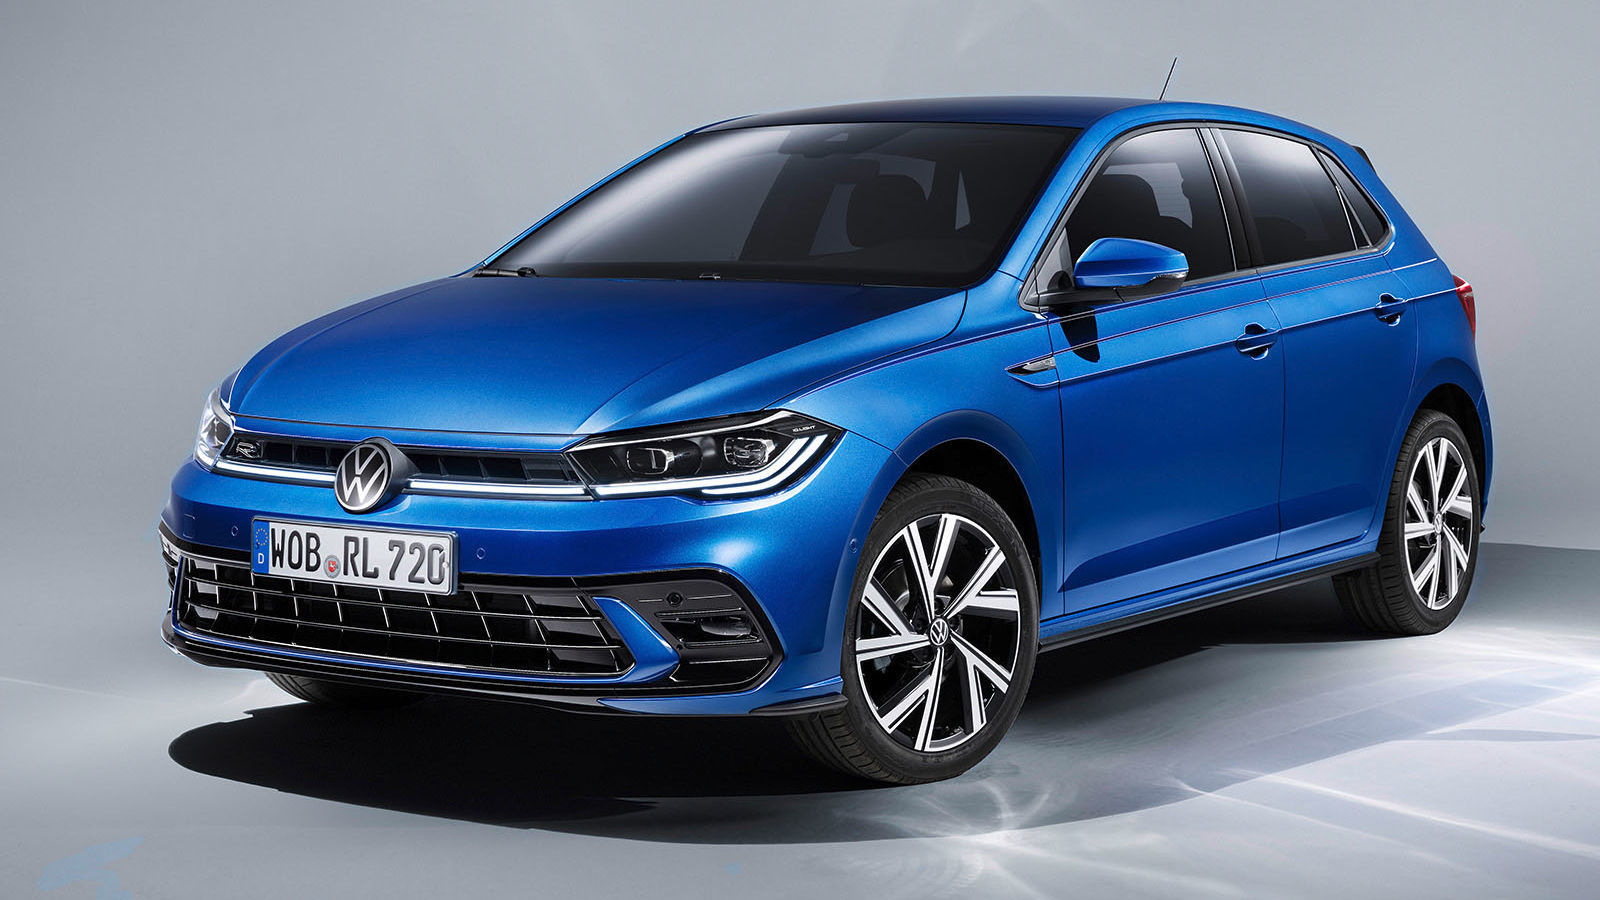 2021 Volkswagen Polo: Five key features that separates the new from the old